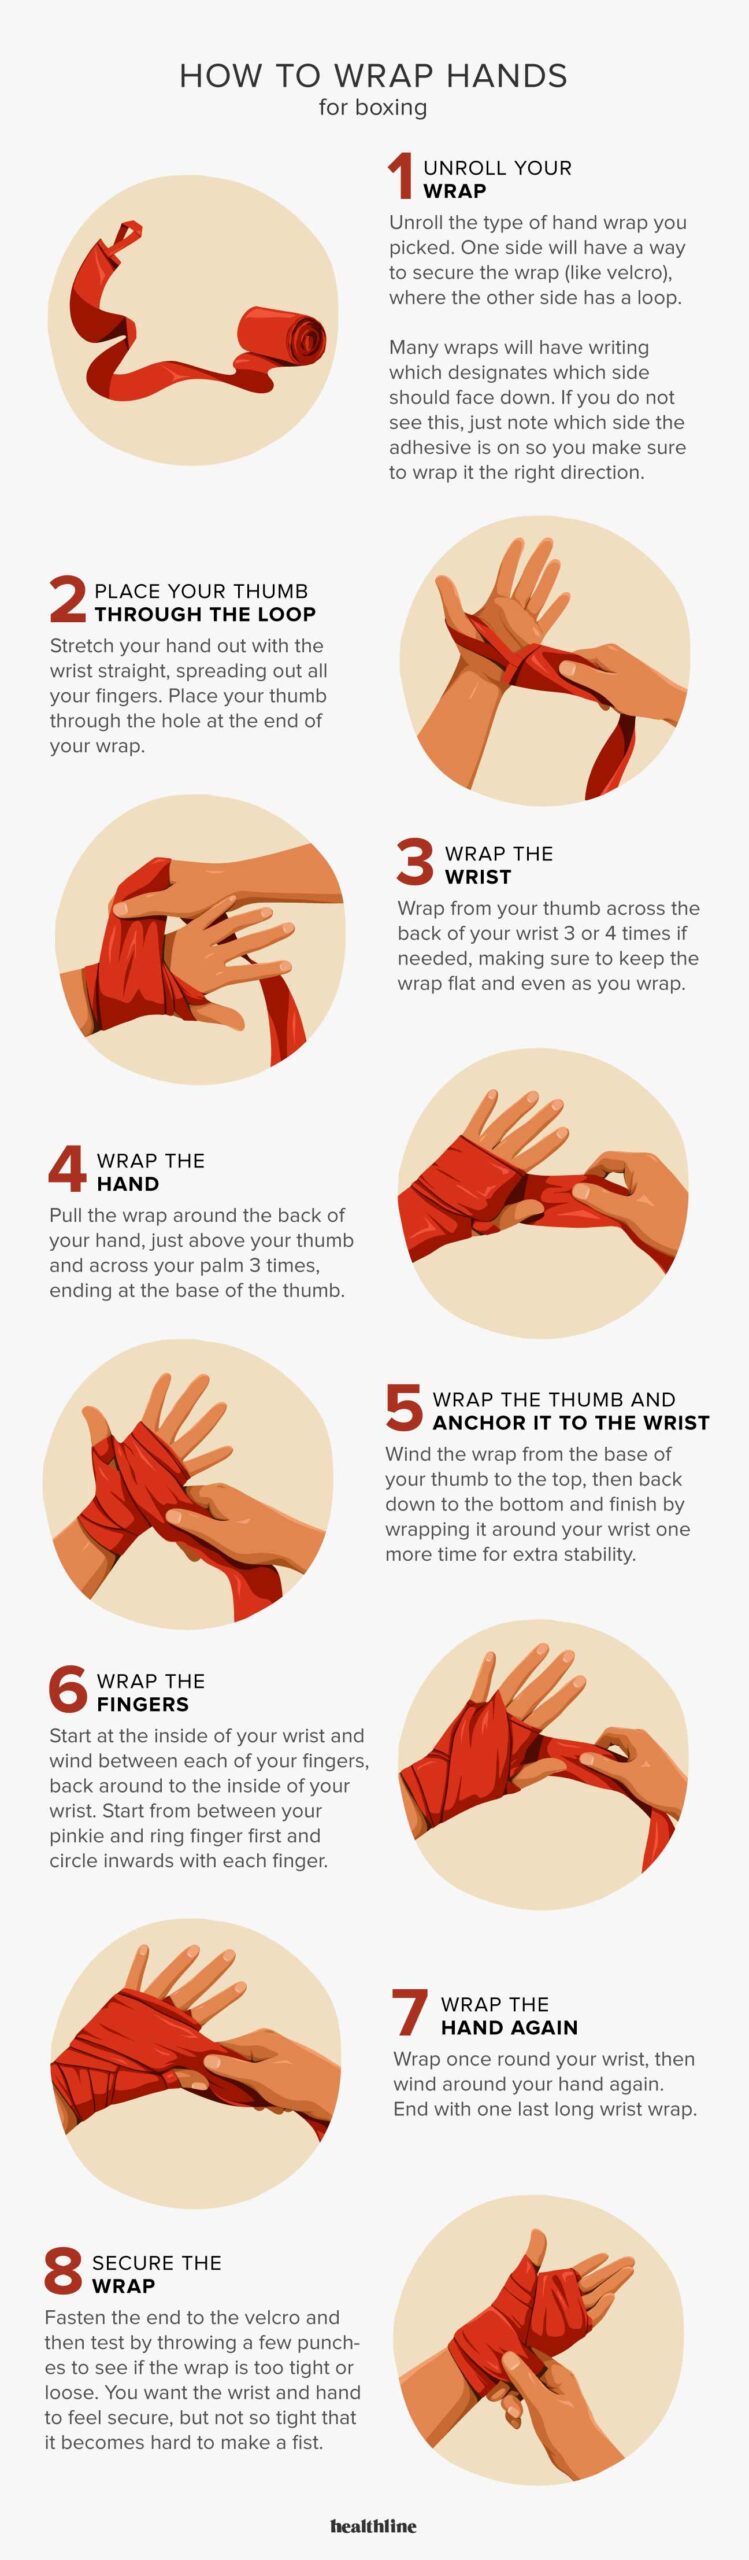 Why Do Boxers Wrap Their Hands? (3 Helpful Reasons)